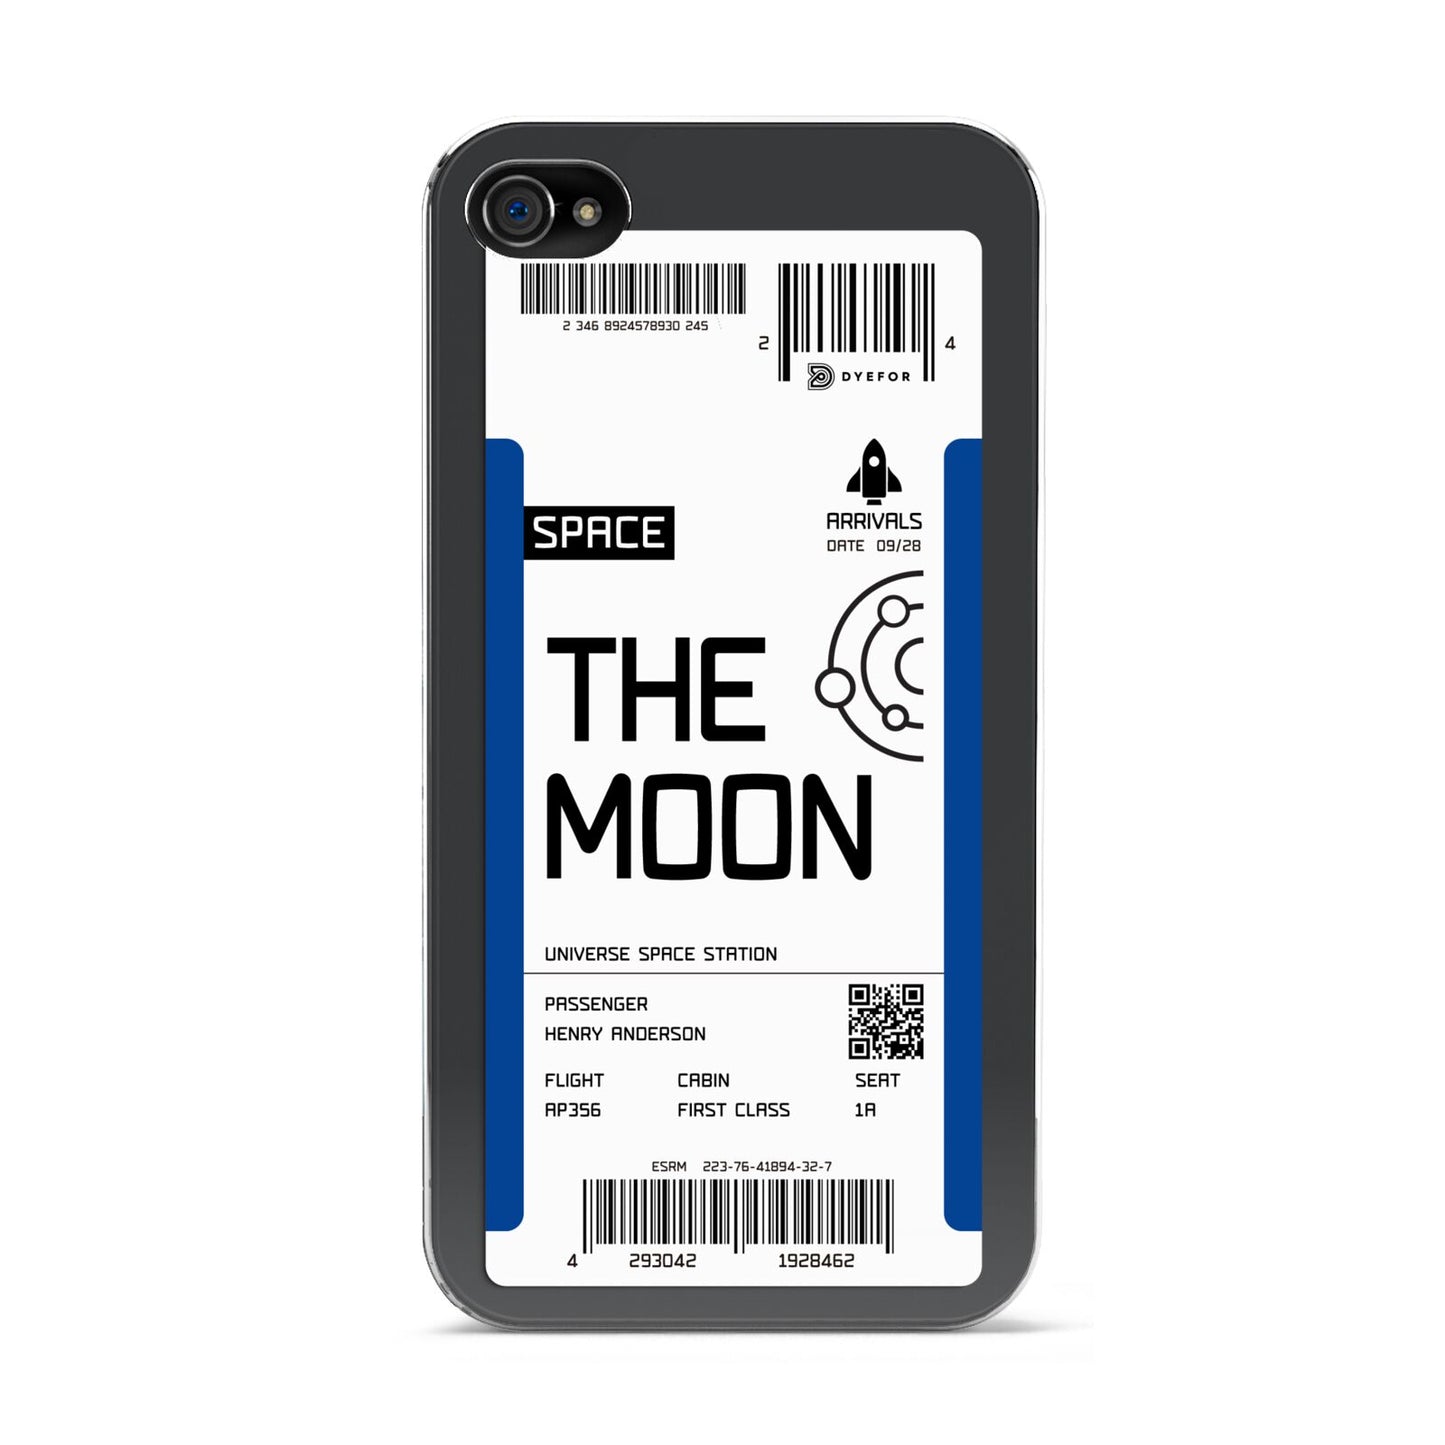 The Moon Boarding Pass Apple iPhone 4s Case